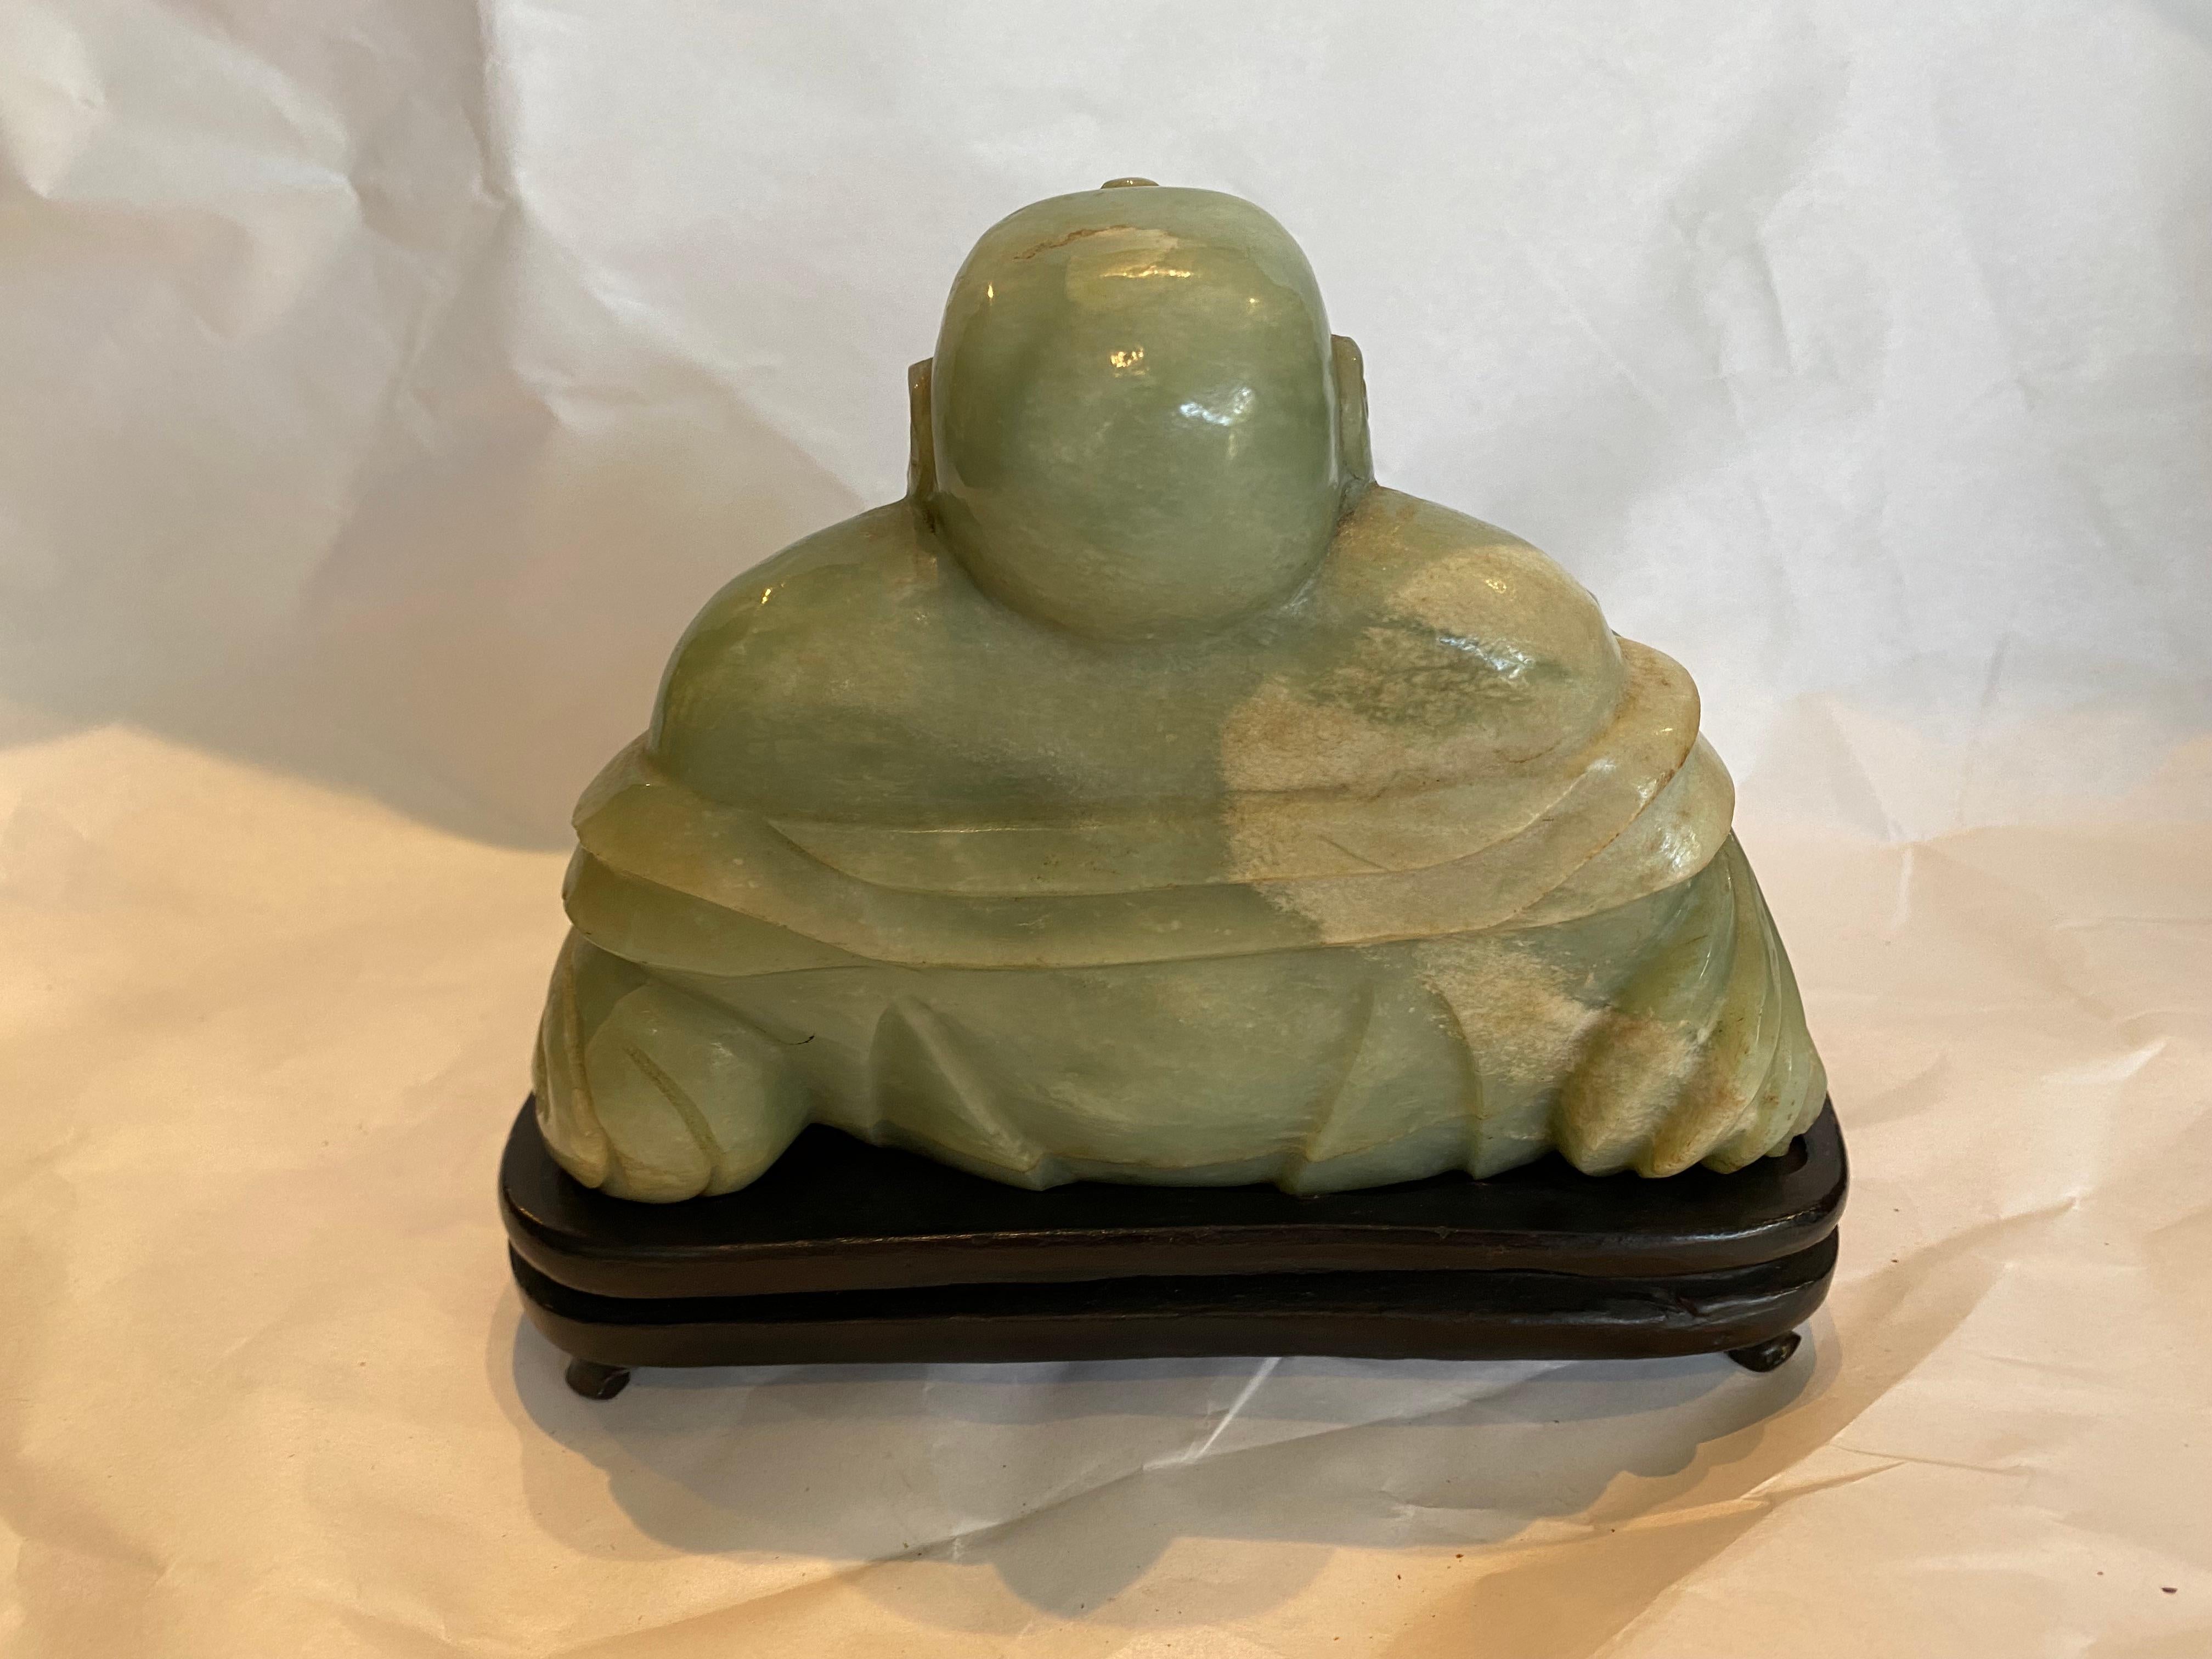 The god of happiness HO TOI is the happy buddha hand carved and sitting on a wood stand coming from a wealth estate.